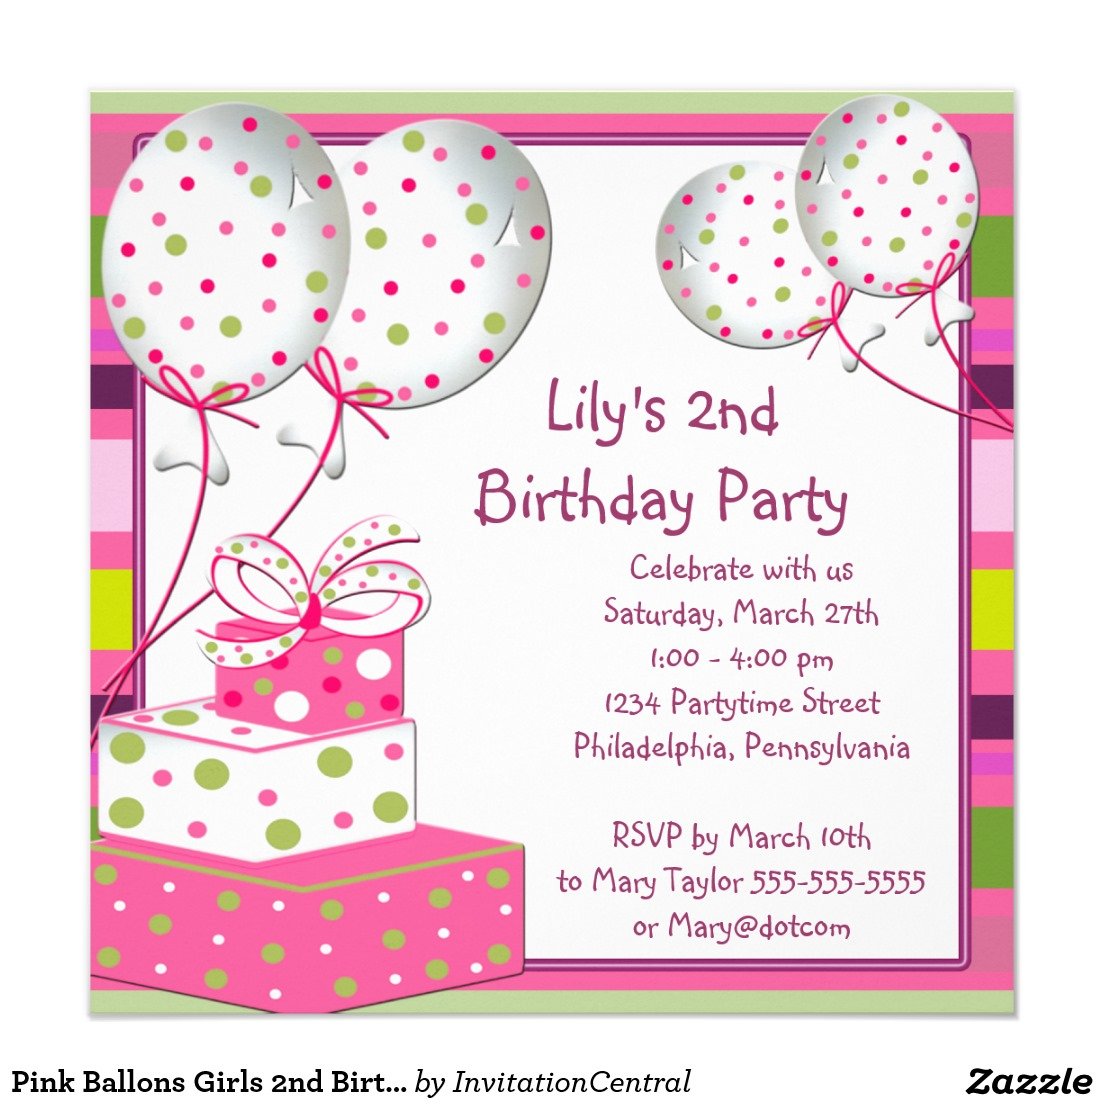 Top 19 Invitation Cards For Birthday Party